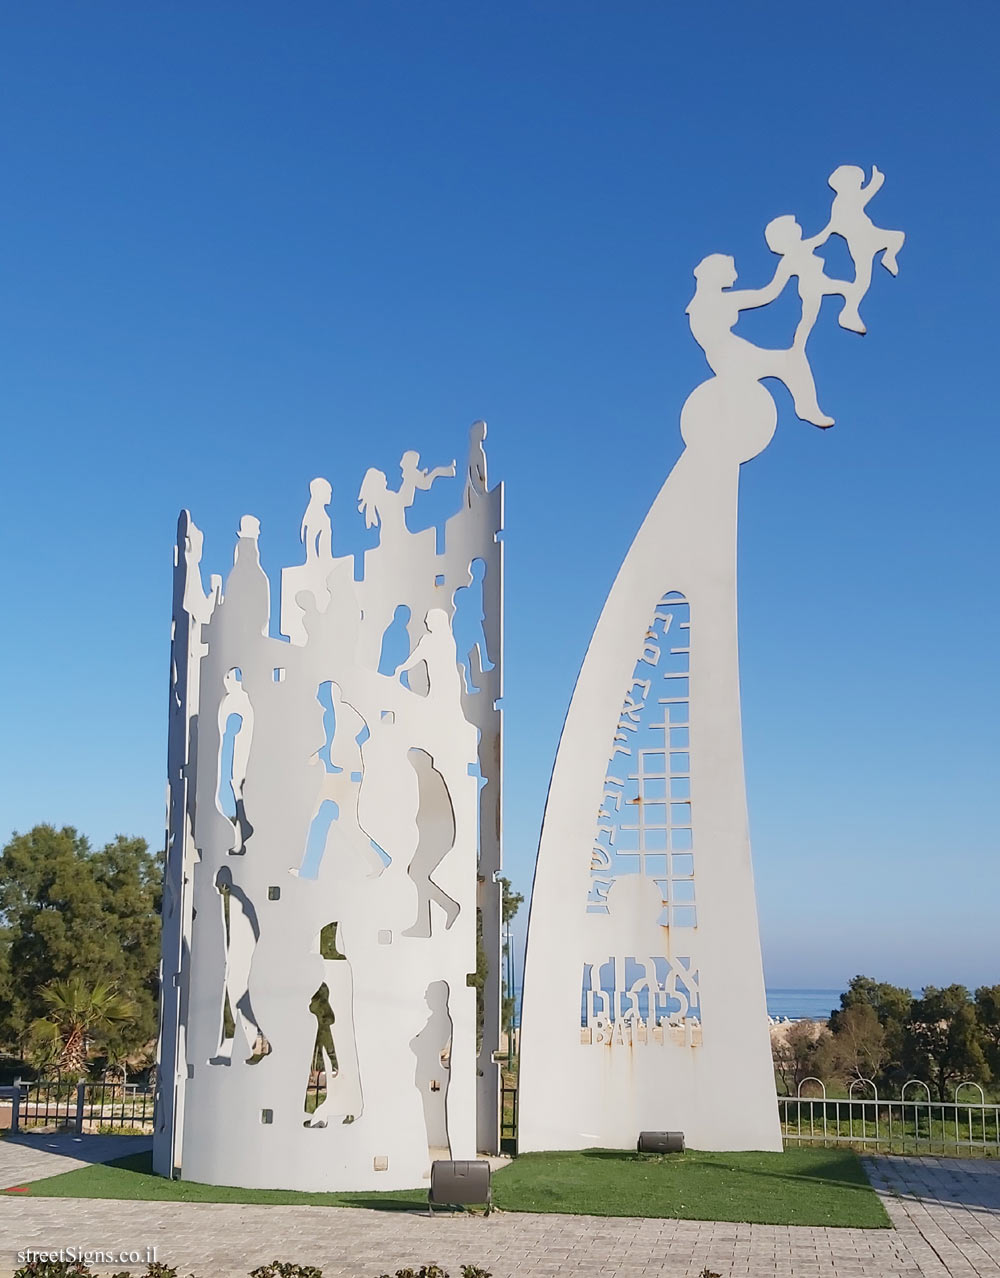 Ashdod - "Shadow and Light" - Commemoration of the immigration of North African Jews - Mafkura/Moshe Dayan, Ashdod, Israel